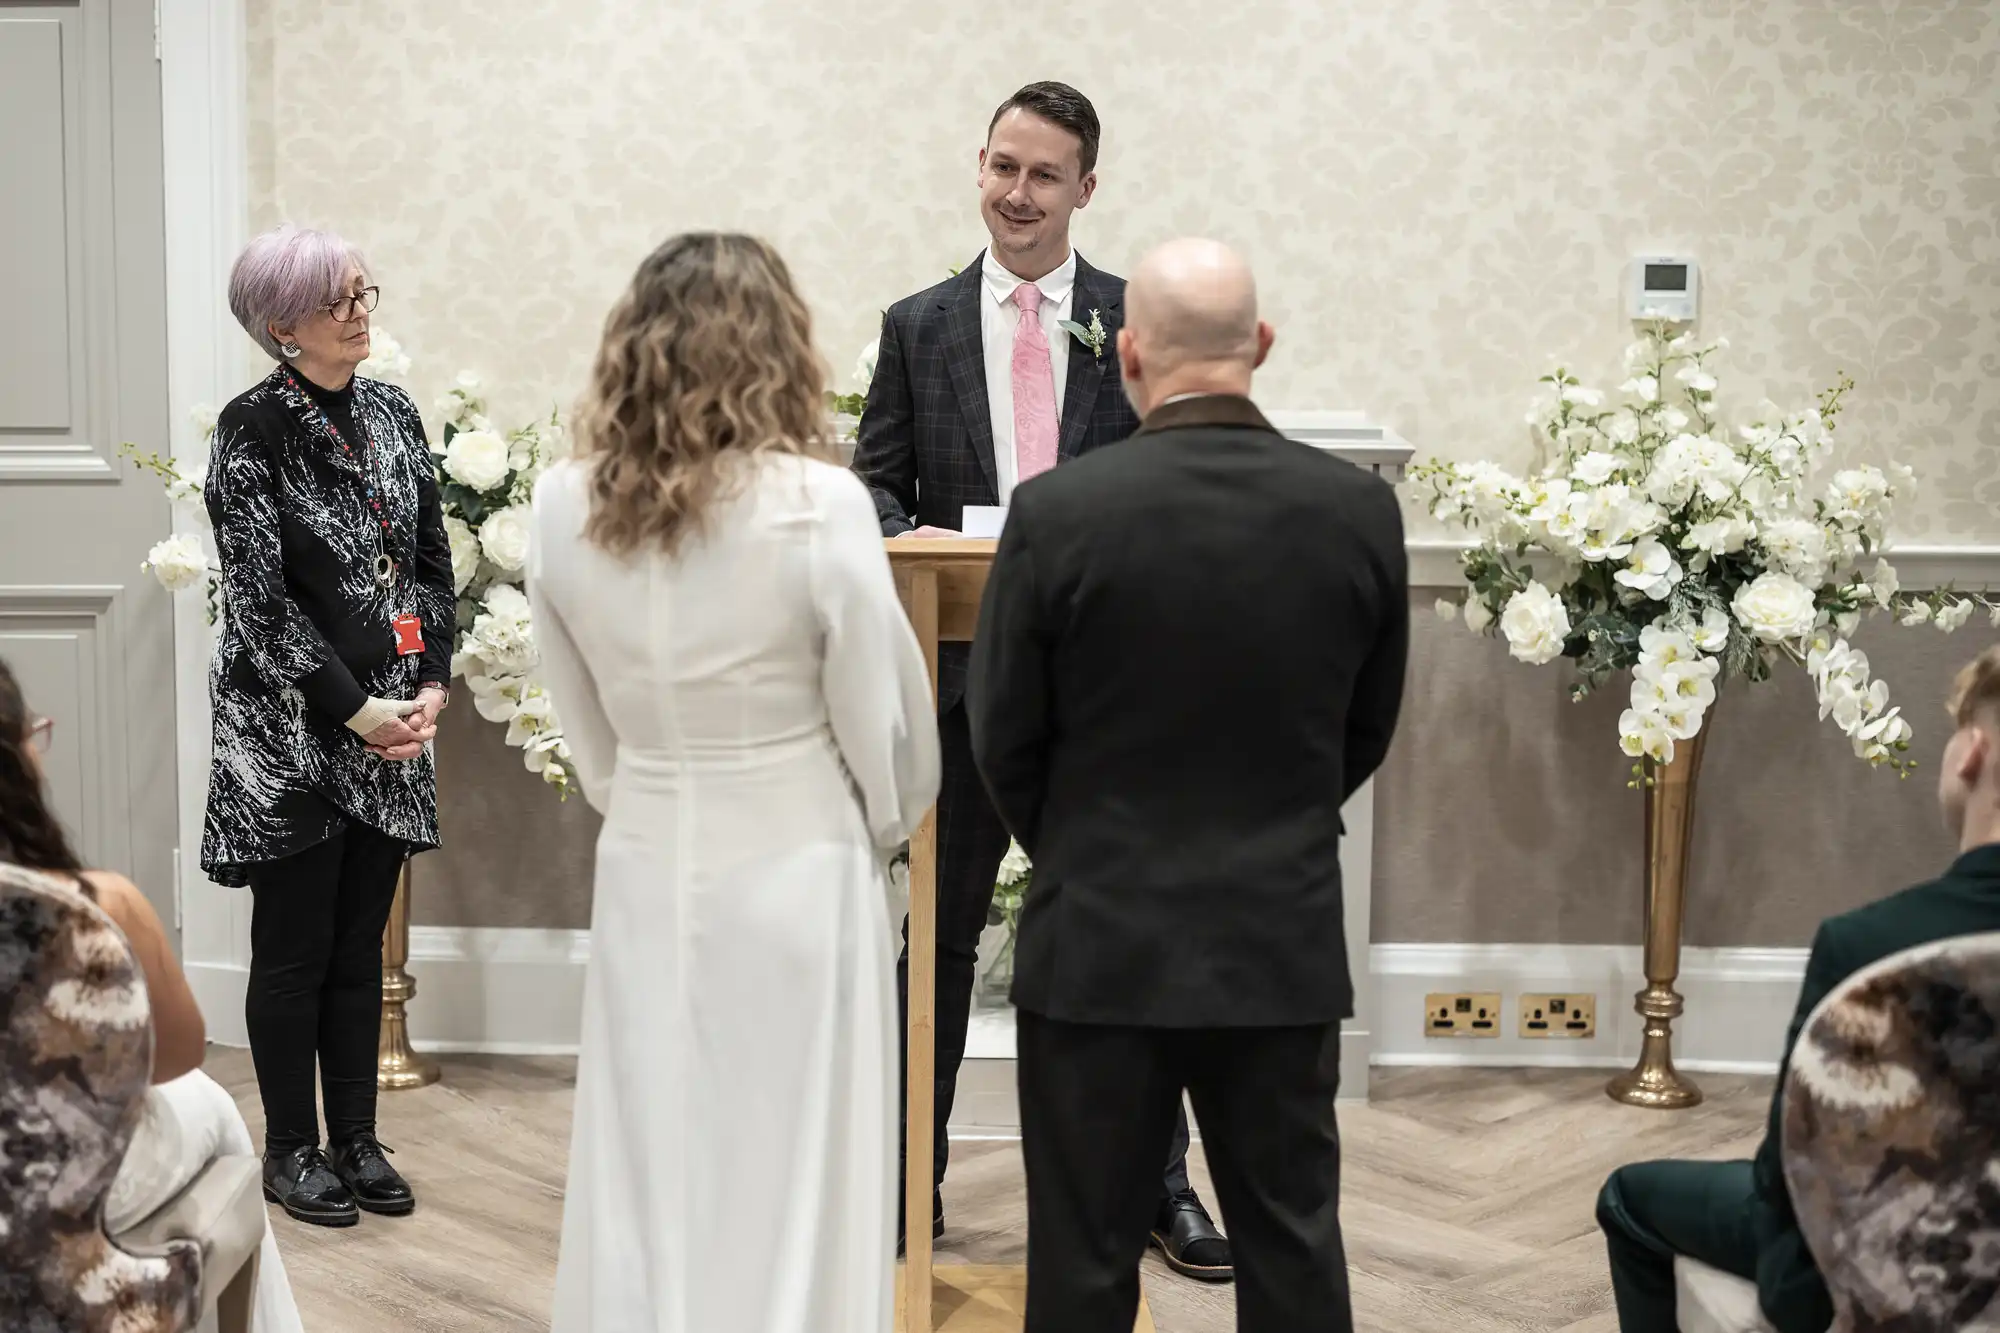 A man stands at a podium speaking to a couple facing him. Another woman stands on the side. Floral arrangements decorate the room, suggesting a formal or ceremonial event.